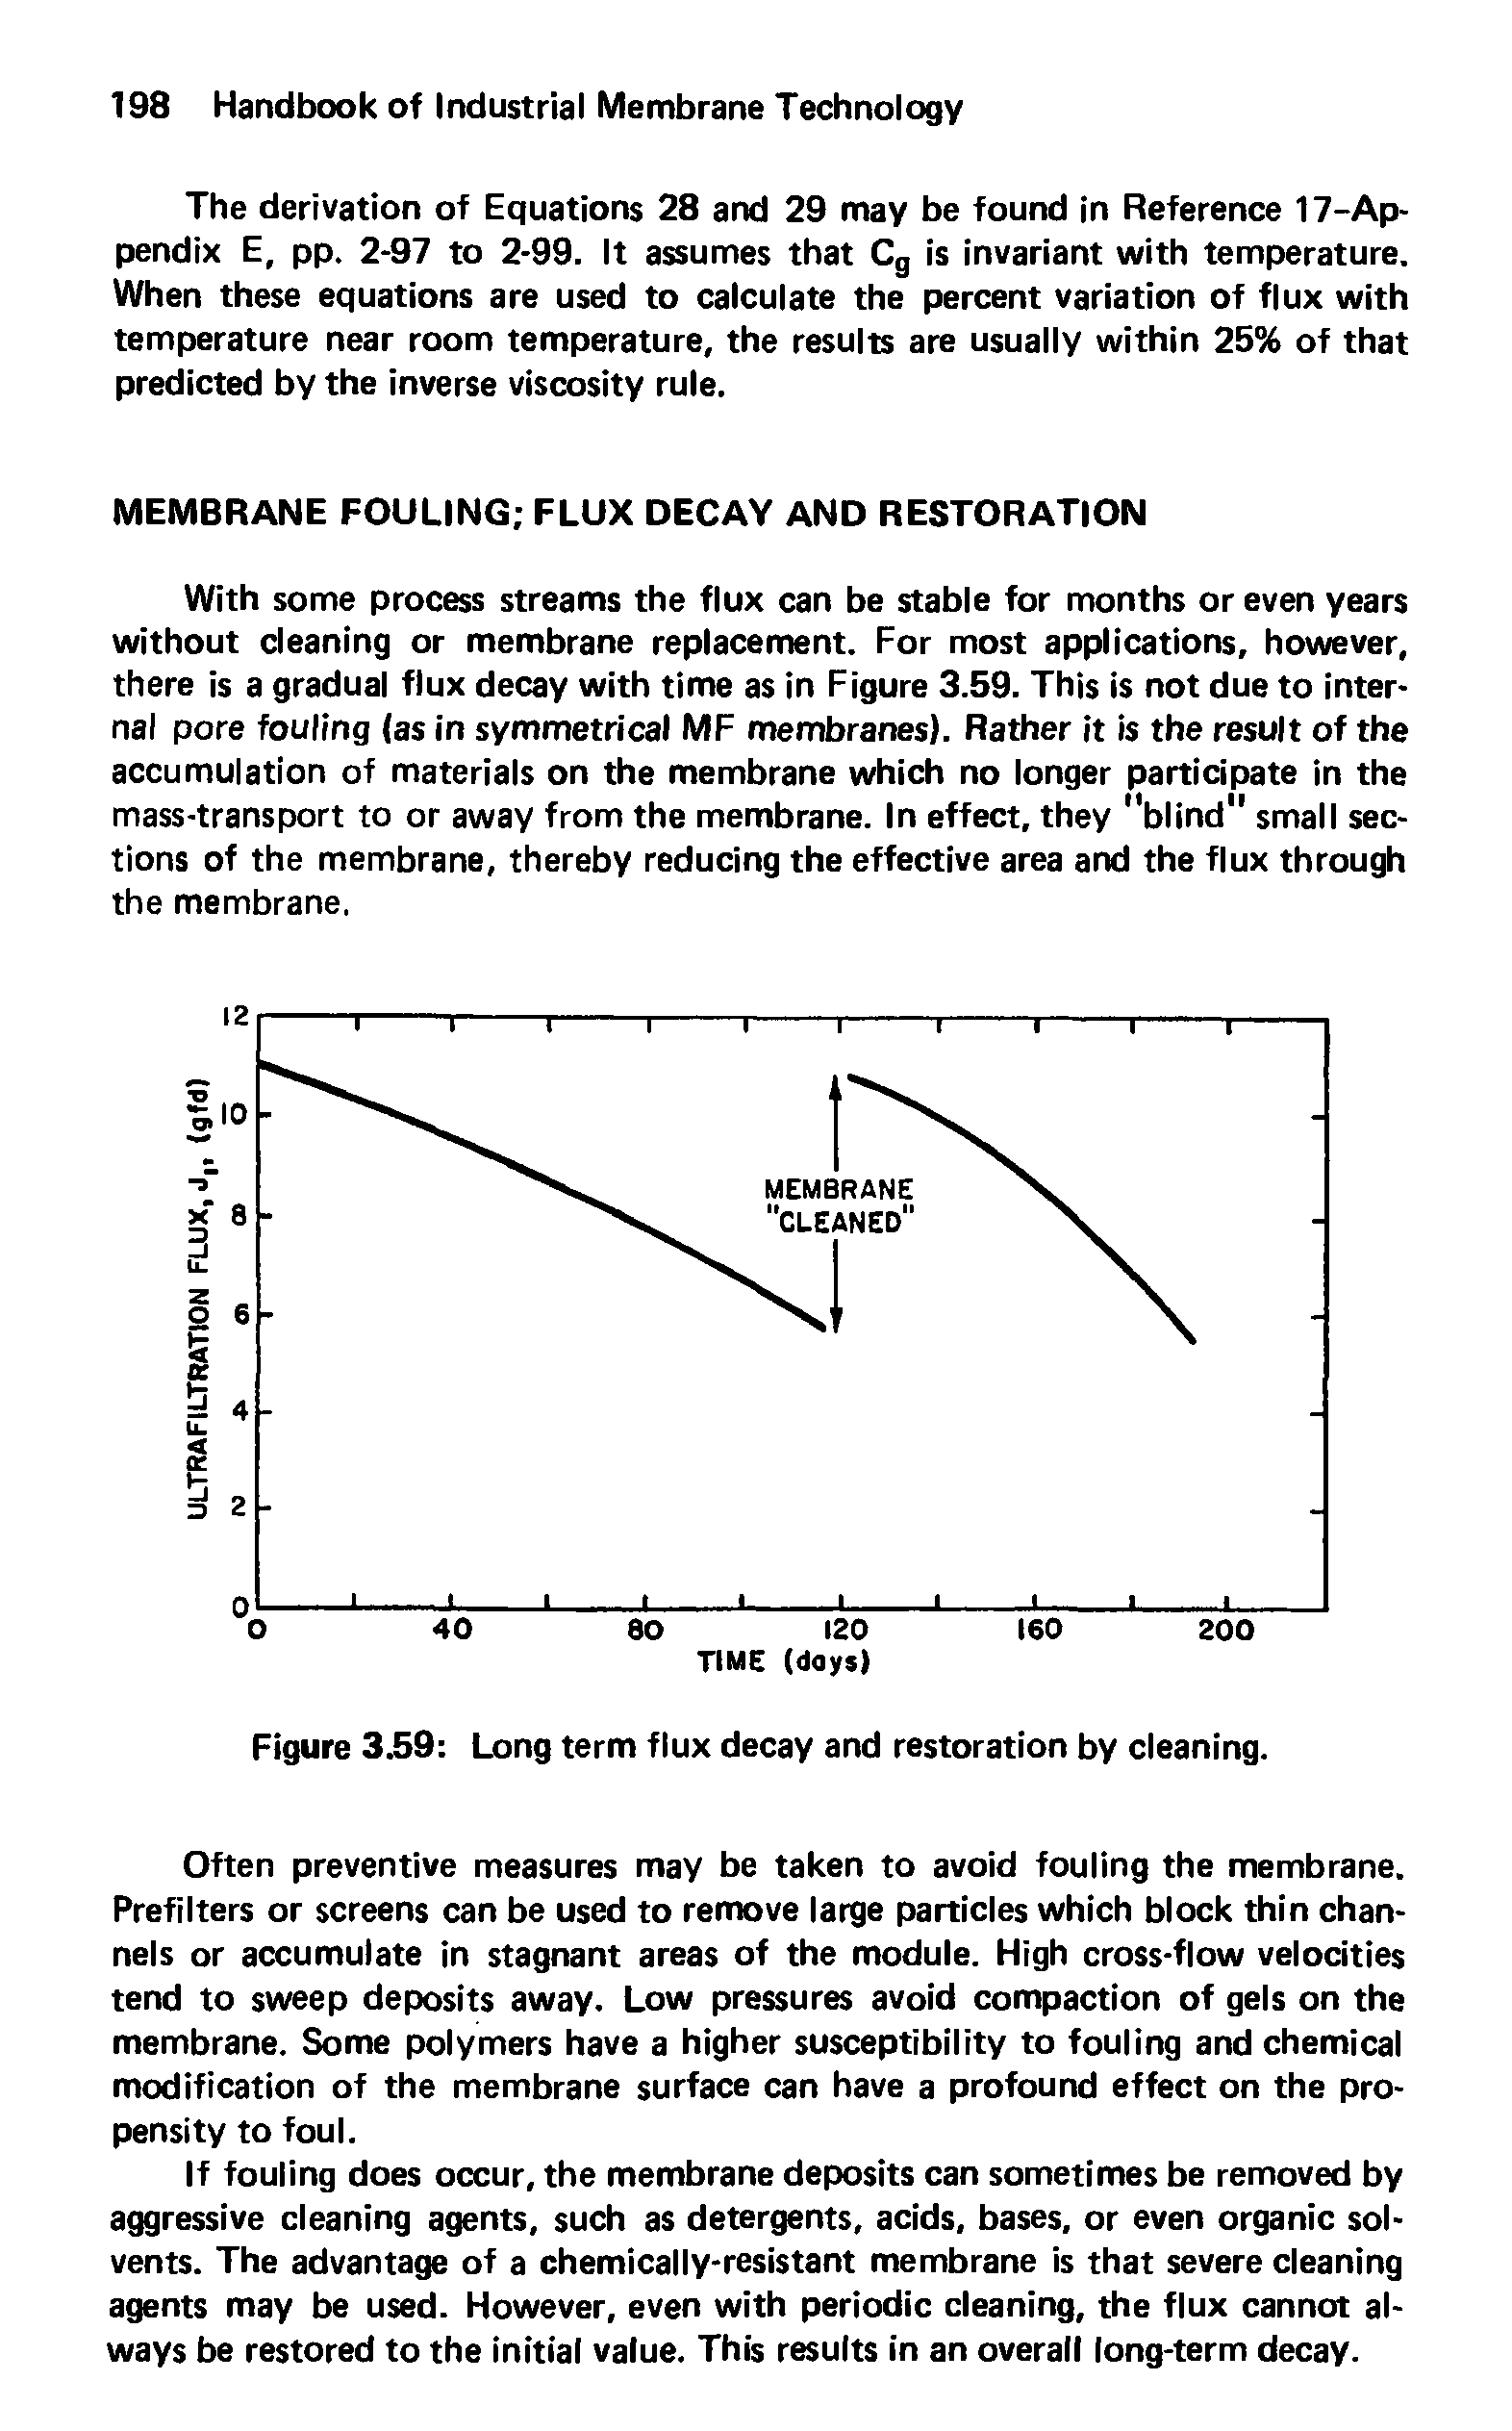 Figure 3.59 Long term flux decay and restoration by cleaning.